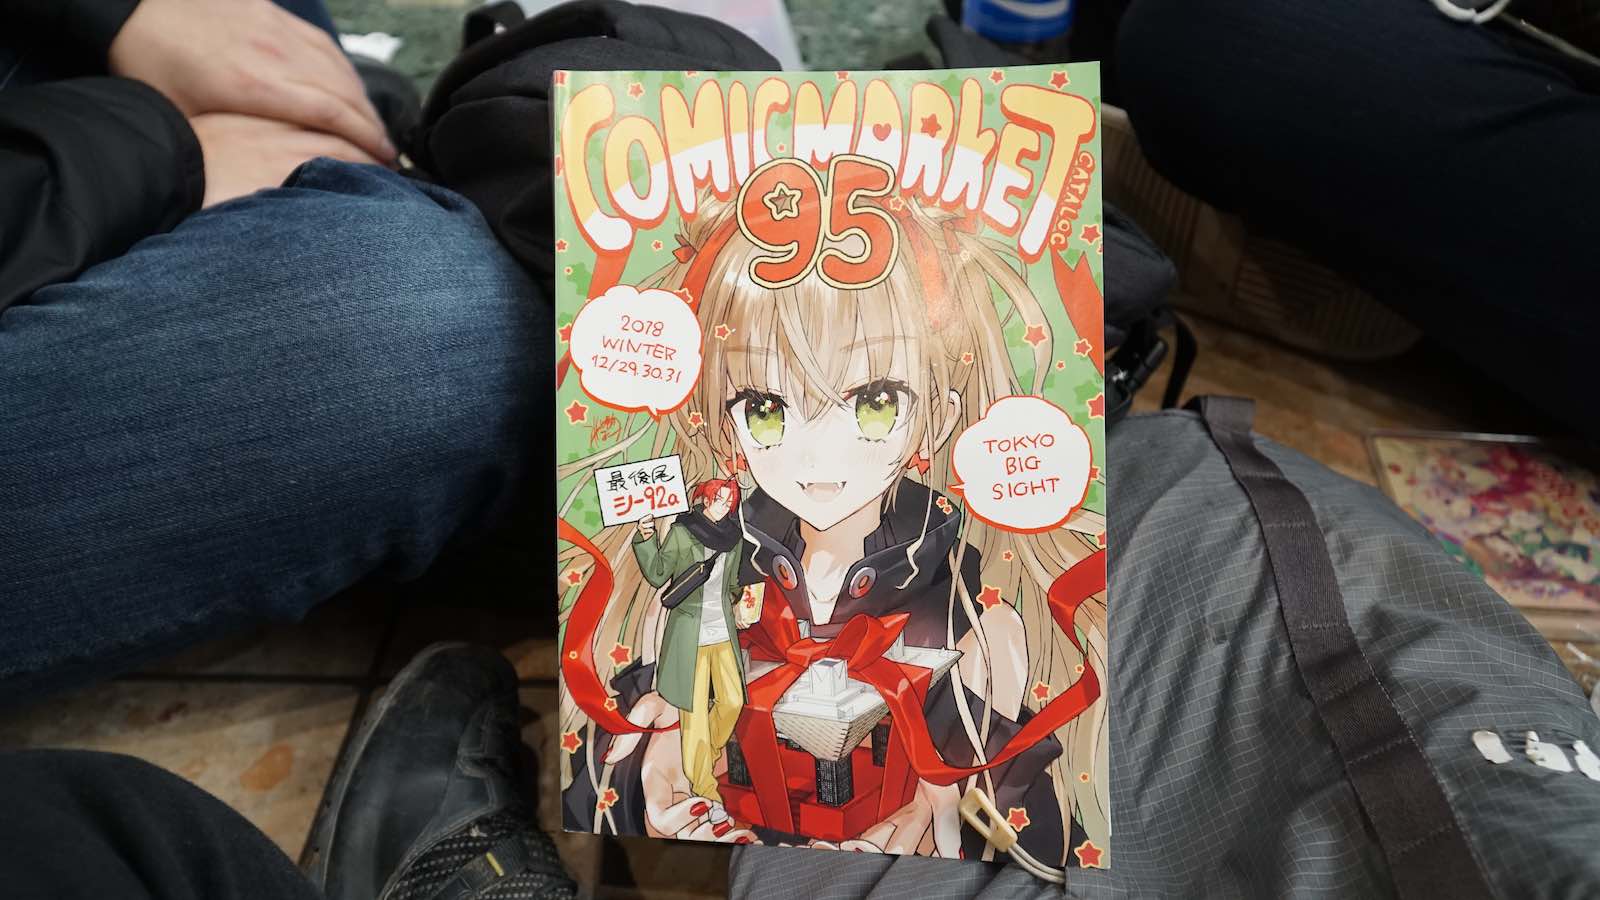 Now I can say I've attended Comiket 95.